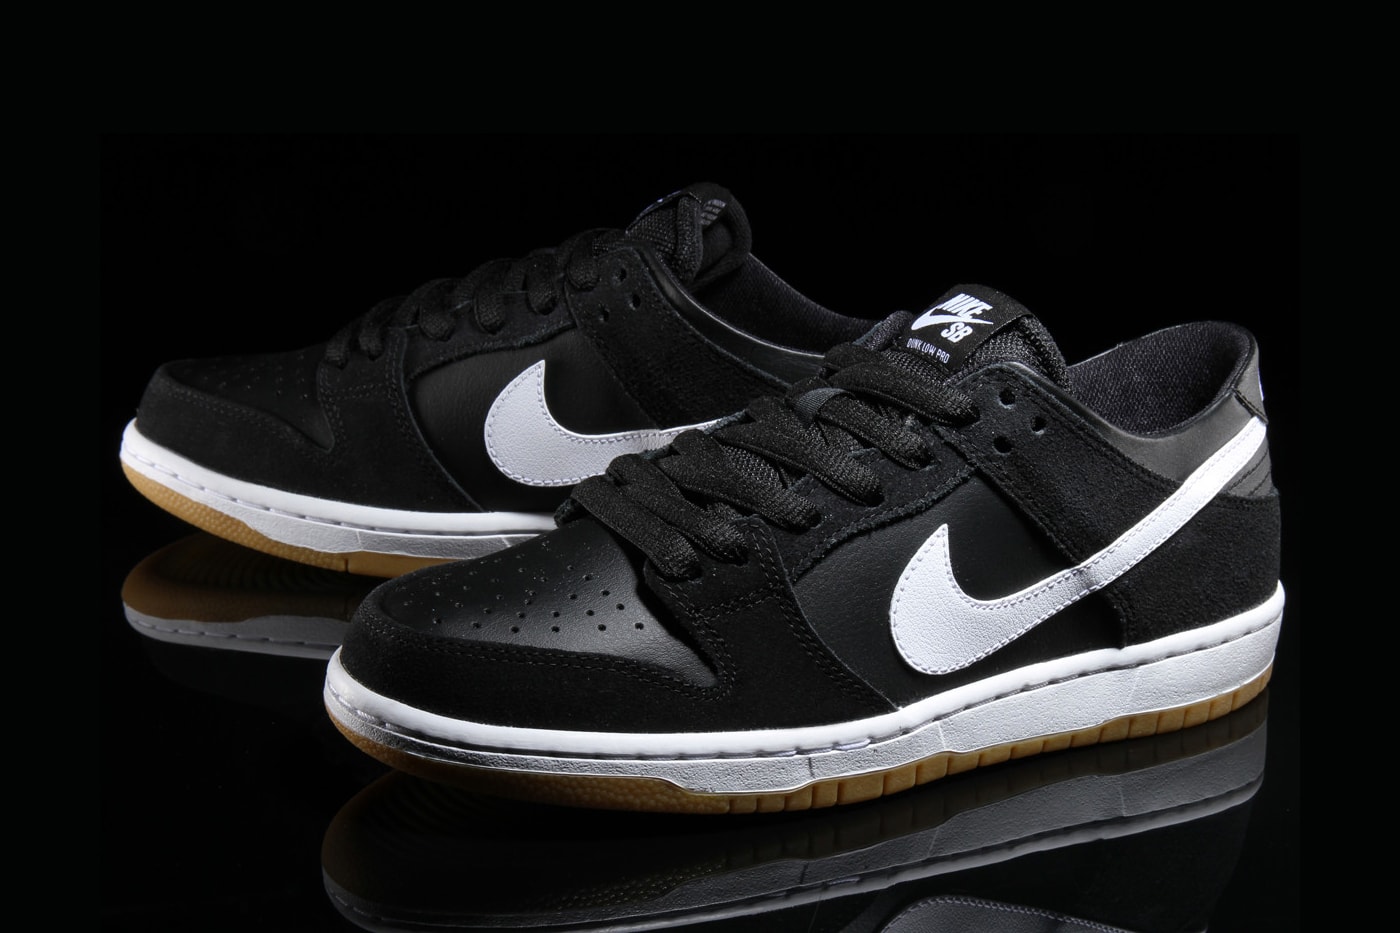 SB Dunk Low Pro in Classic Black/White/Gum Colorway | Hypebeast